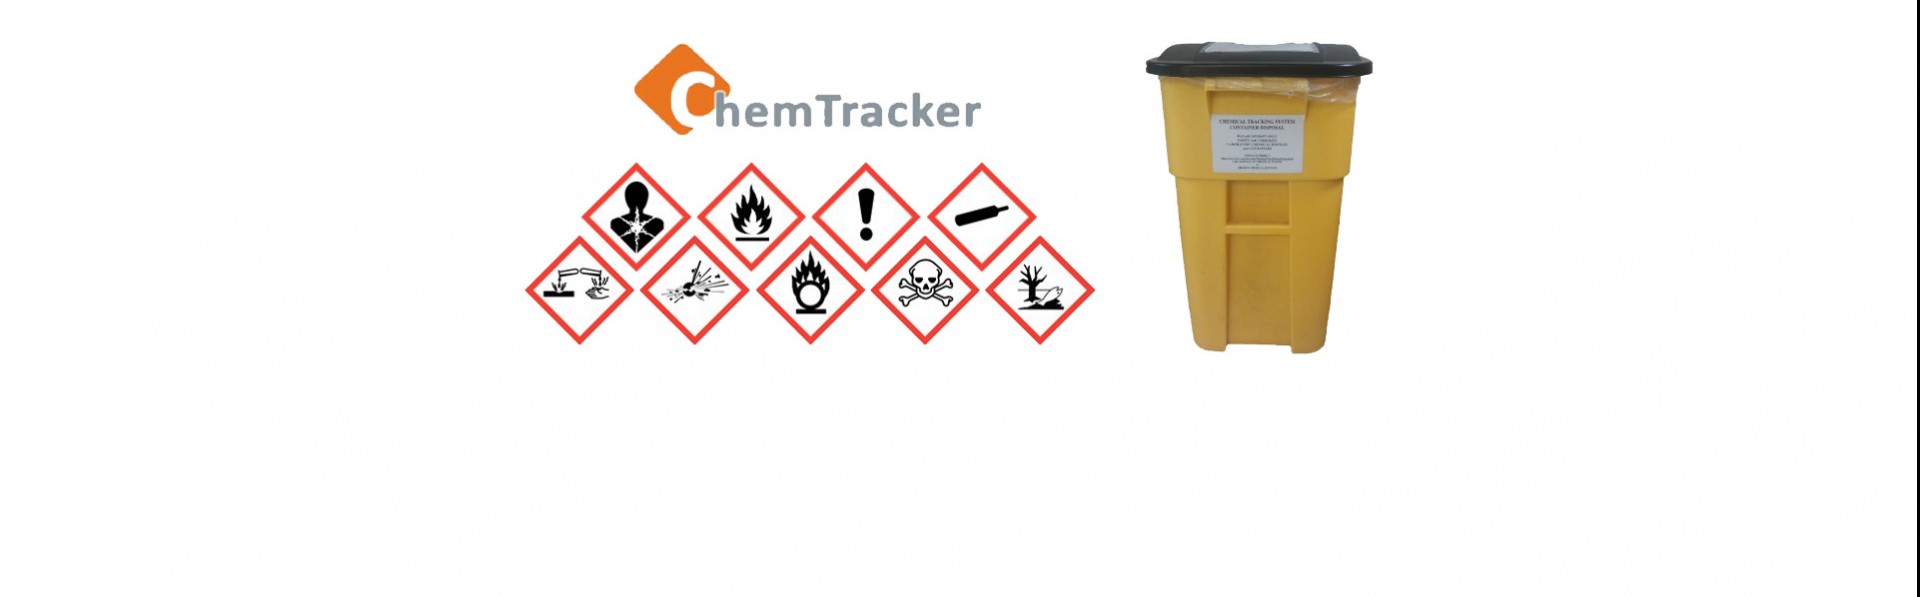 ChemTracker logo with warning signs beneath and a yellow bin to the right